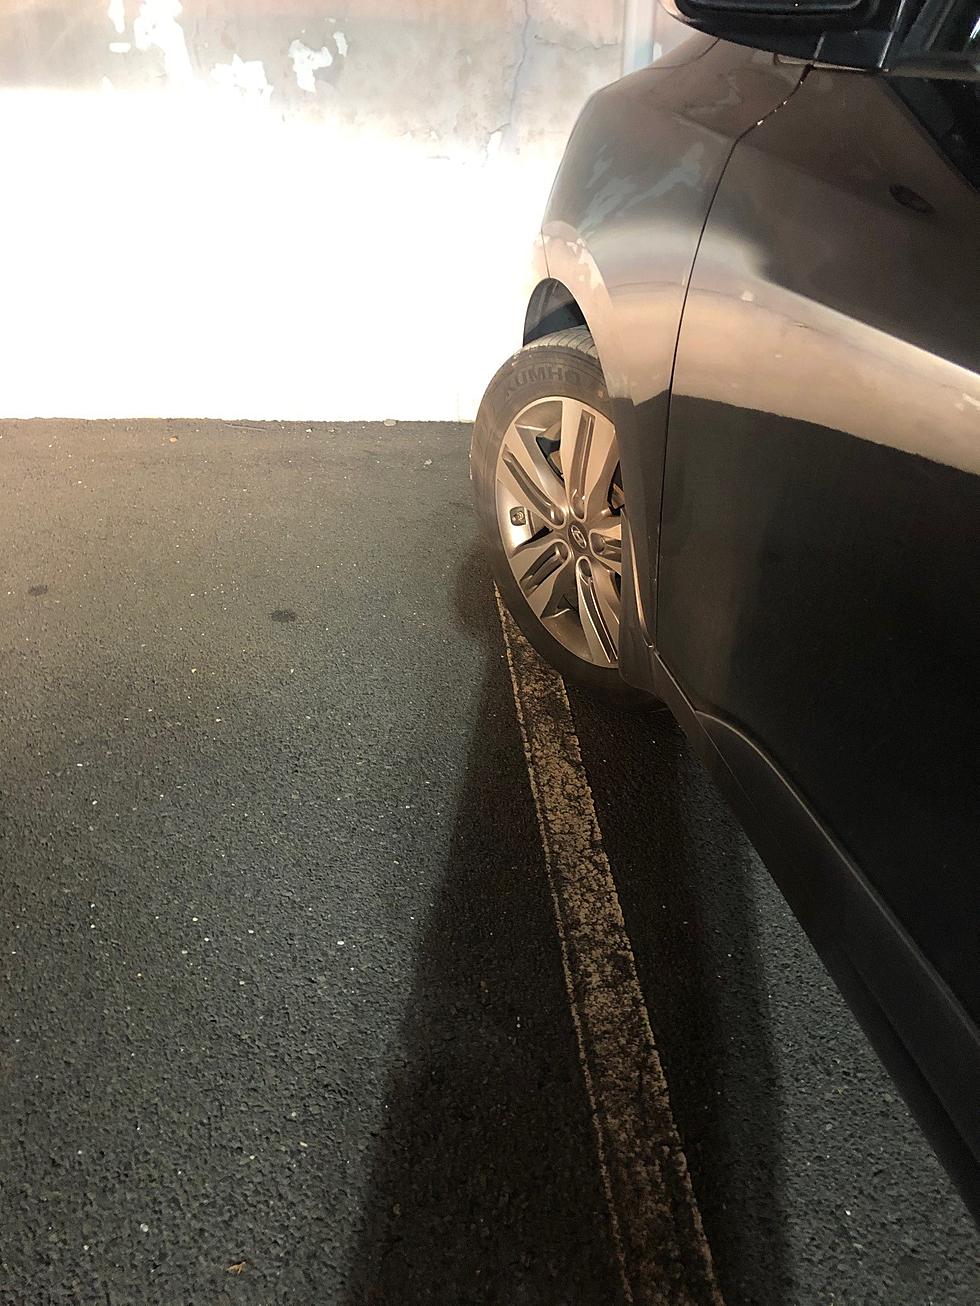 The Bad Parking Epidemic Has Reached The Point Parking Lot